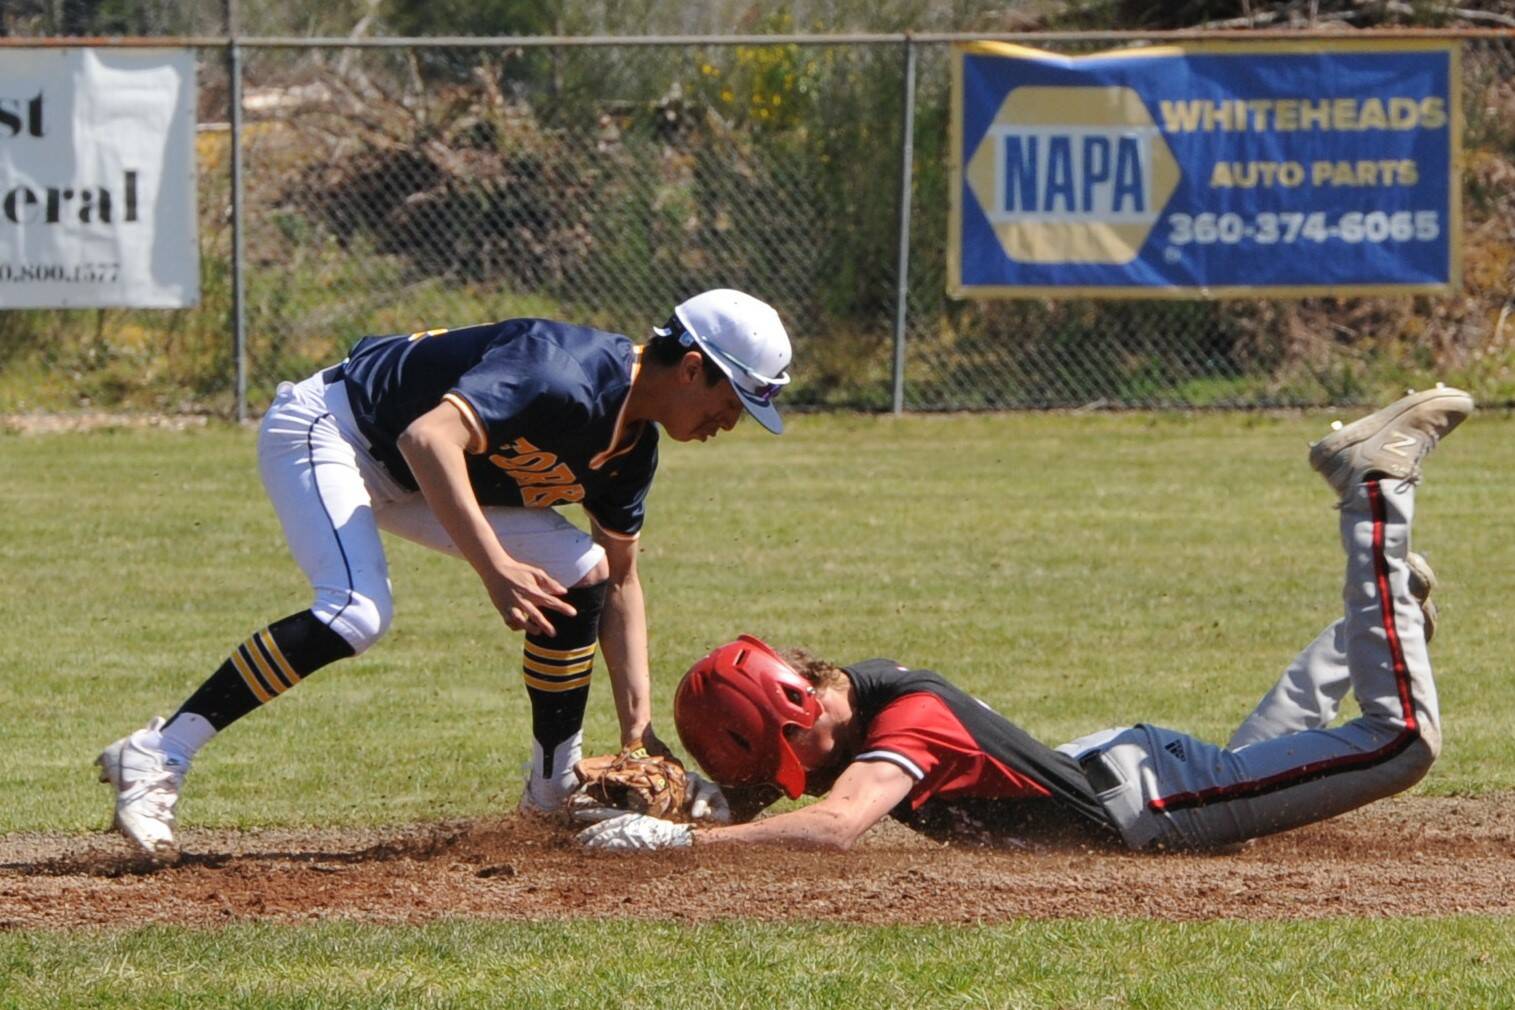 Spartan Aidan Salazar tags the Coupeville runner out at second in this nonleague game played Saturday at the Fred Orr Memorial Park in Beaver. Trailing 4 to 1 in the final inning, Forks came back to defeat the Wolves 5 to 4. Also on Saturday, the Spartan softball team defeated Coupville 11 to 2 at Tillicum Park. Photo by Lonnie Archibald